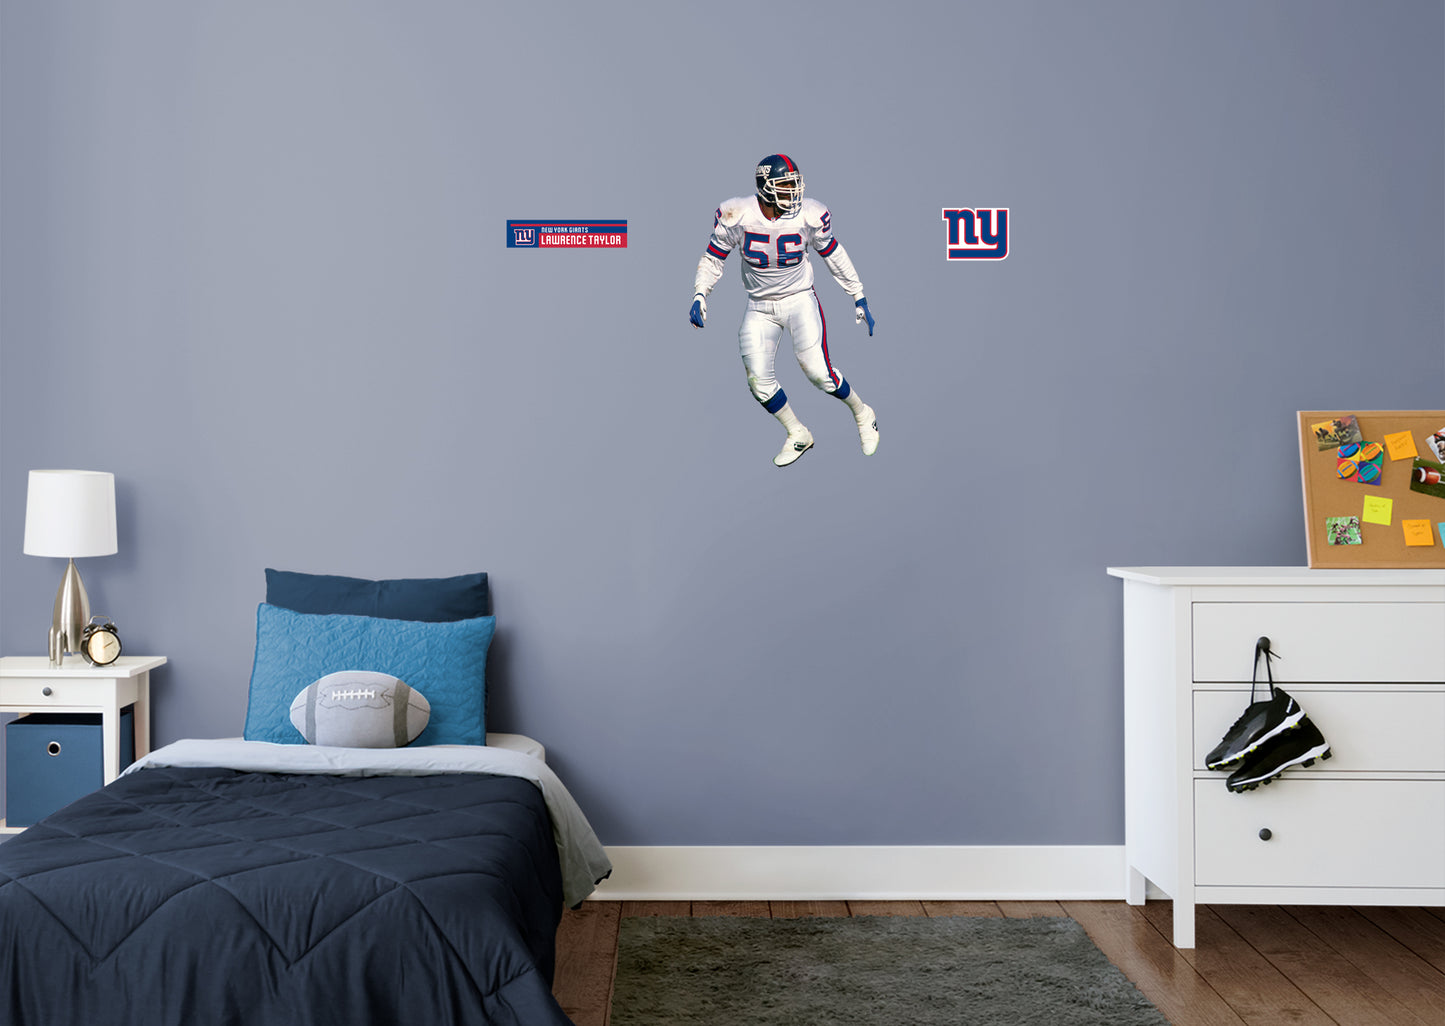 New York Giants: Lawrence Taylor  Legend        - Officially Licensed NFL Removable Wall   Adhesive Decal